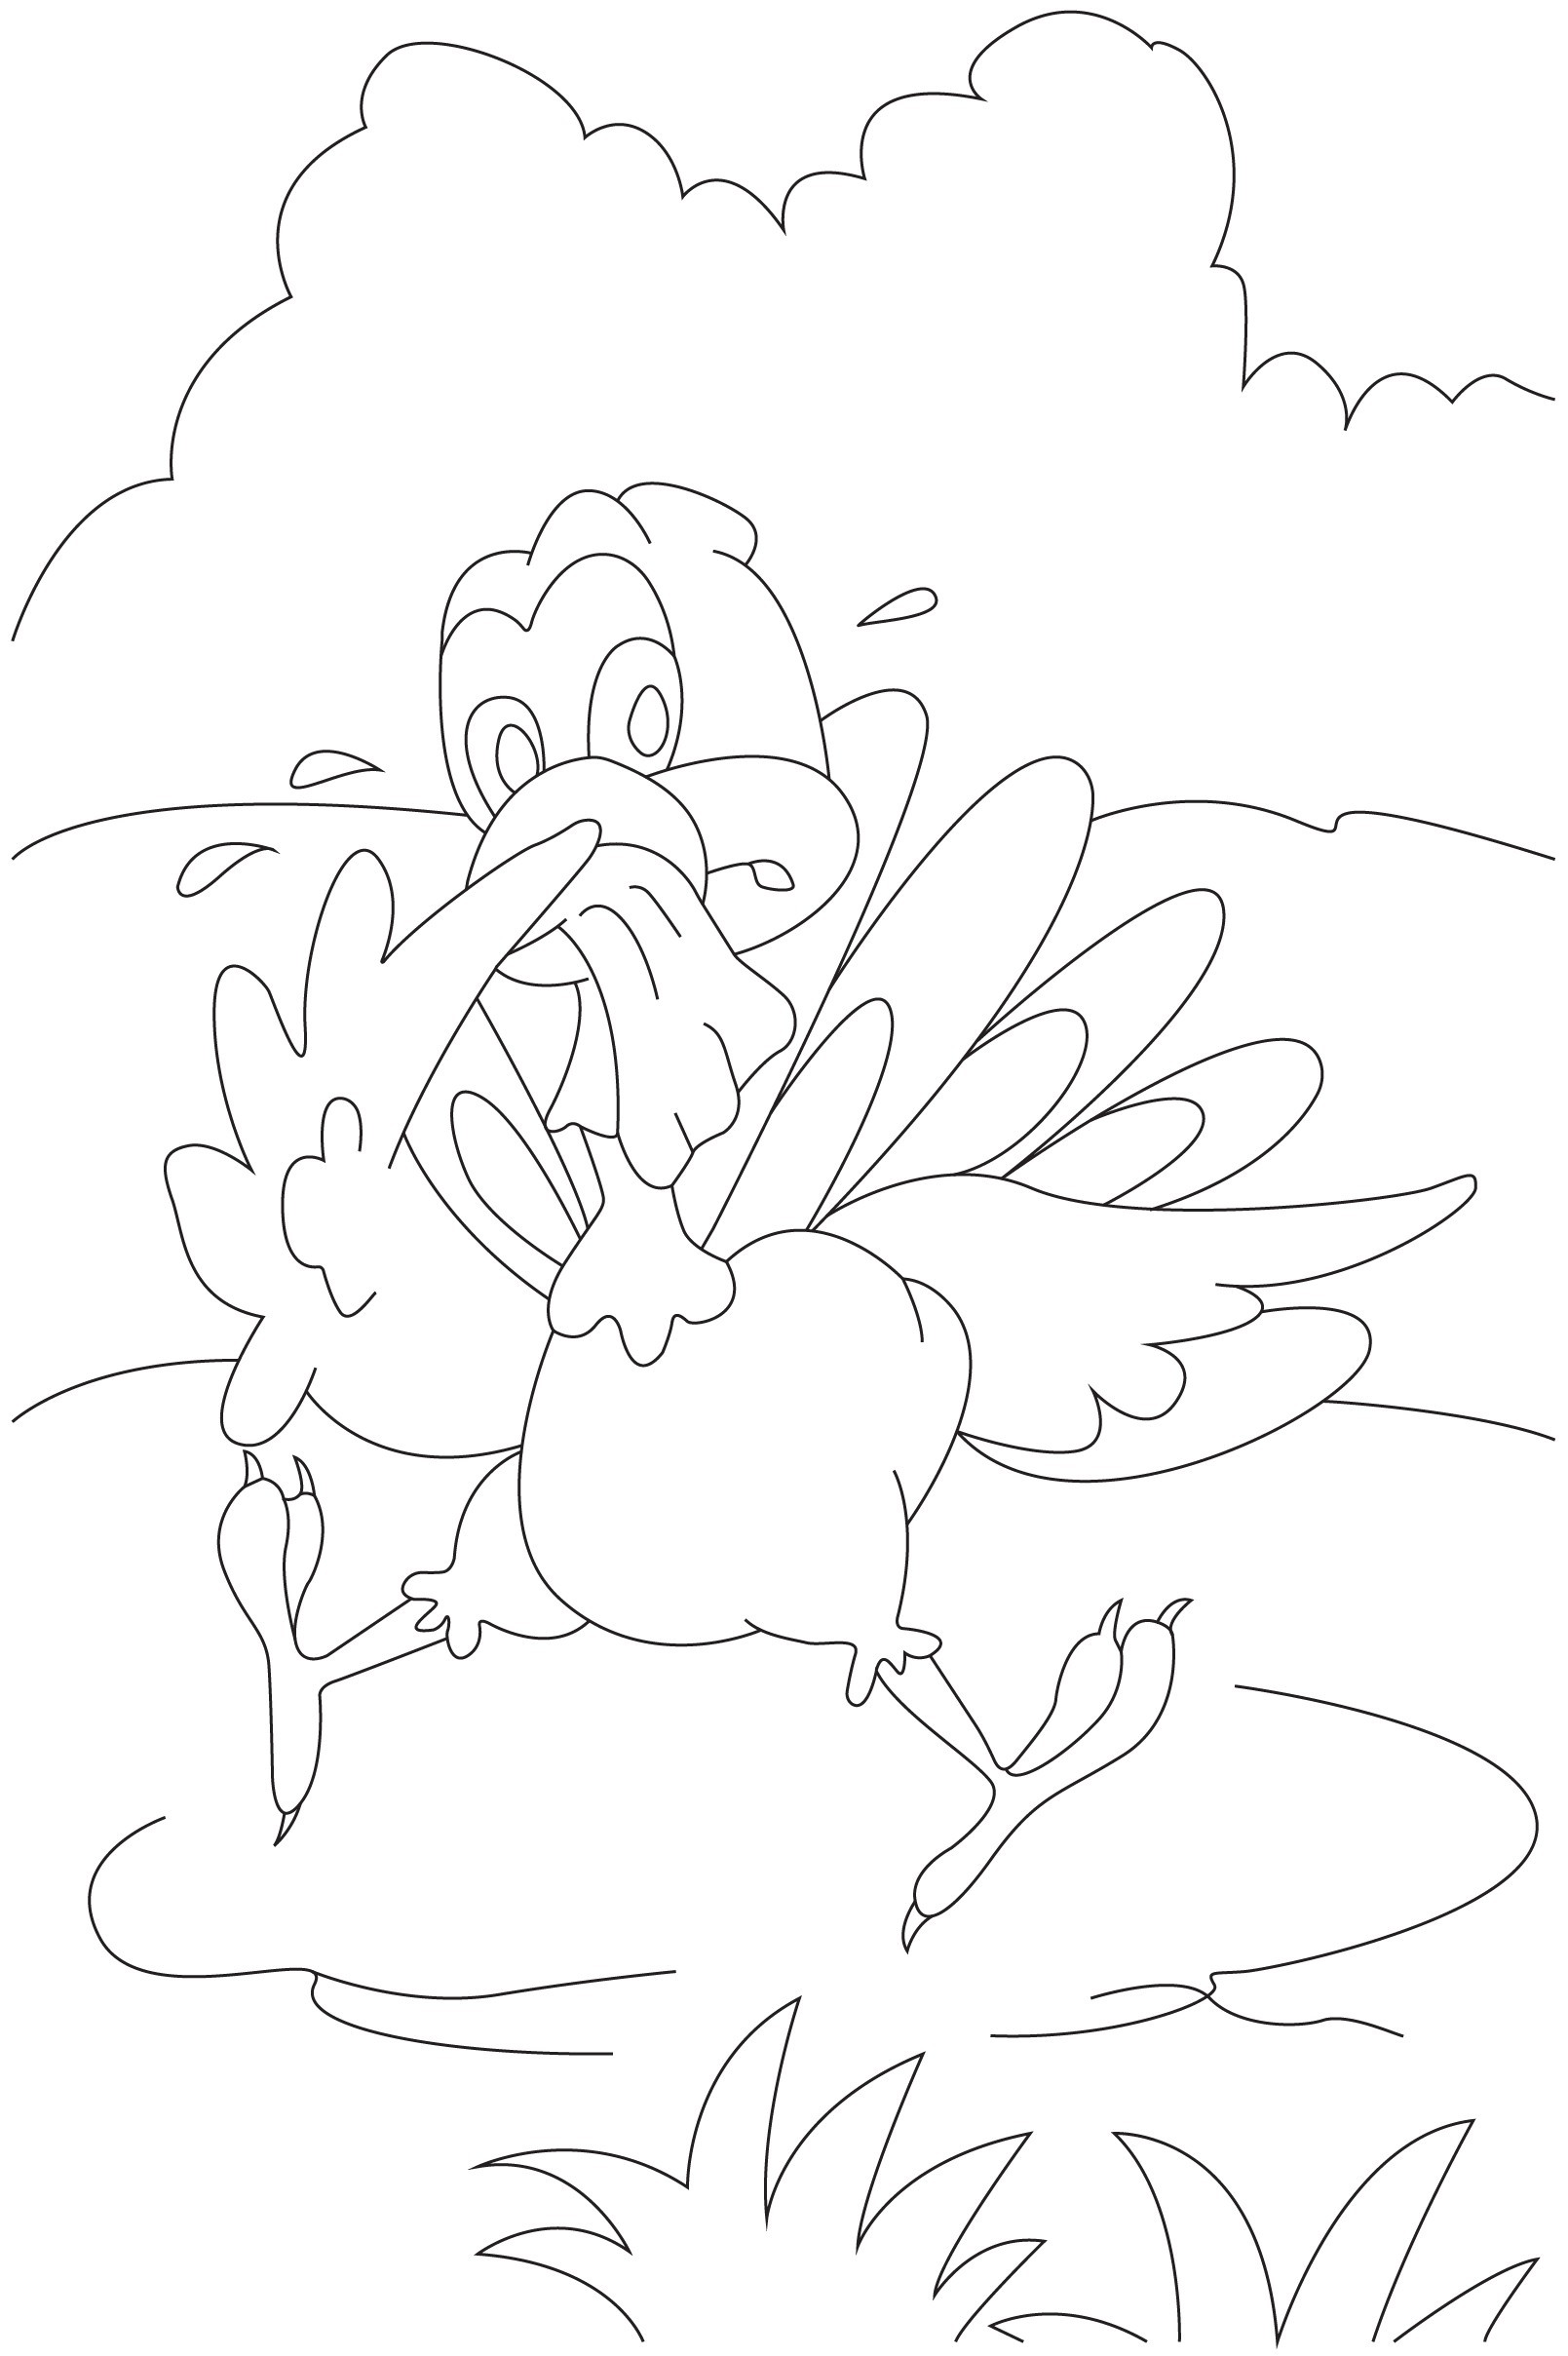 Cartoon turkey coloring page for children